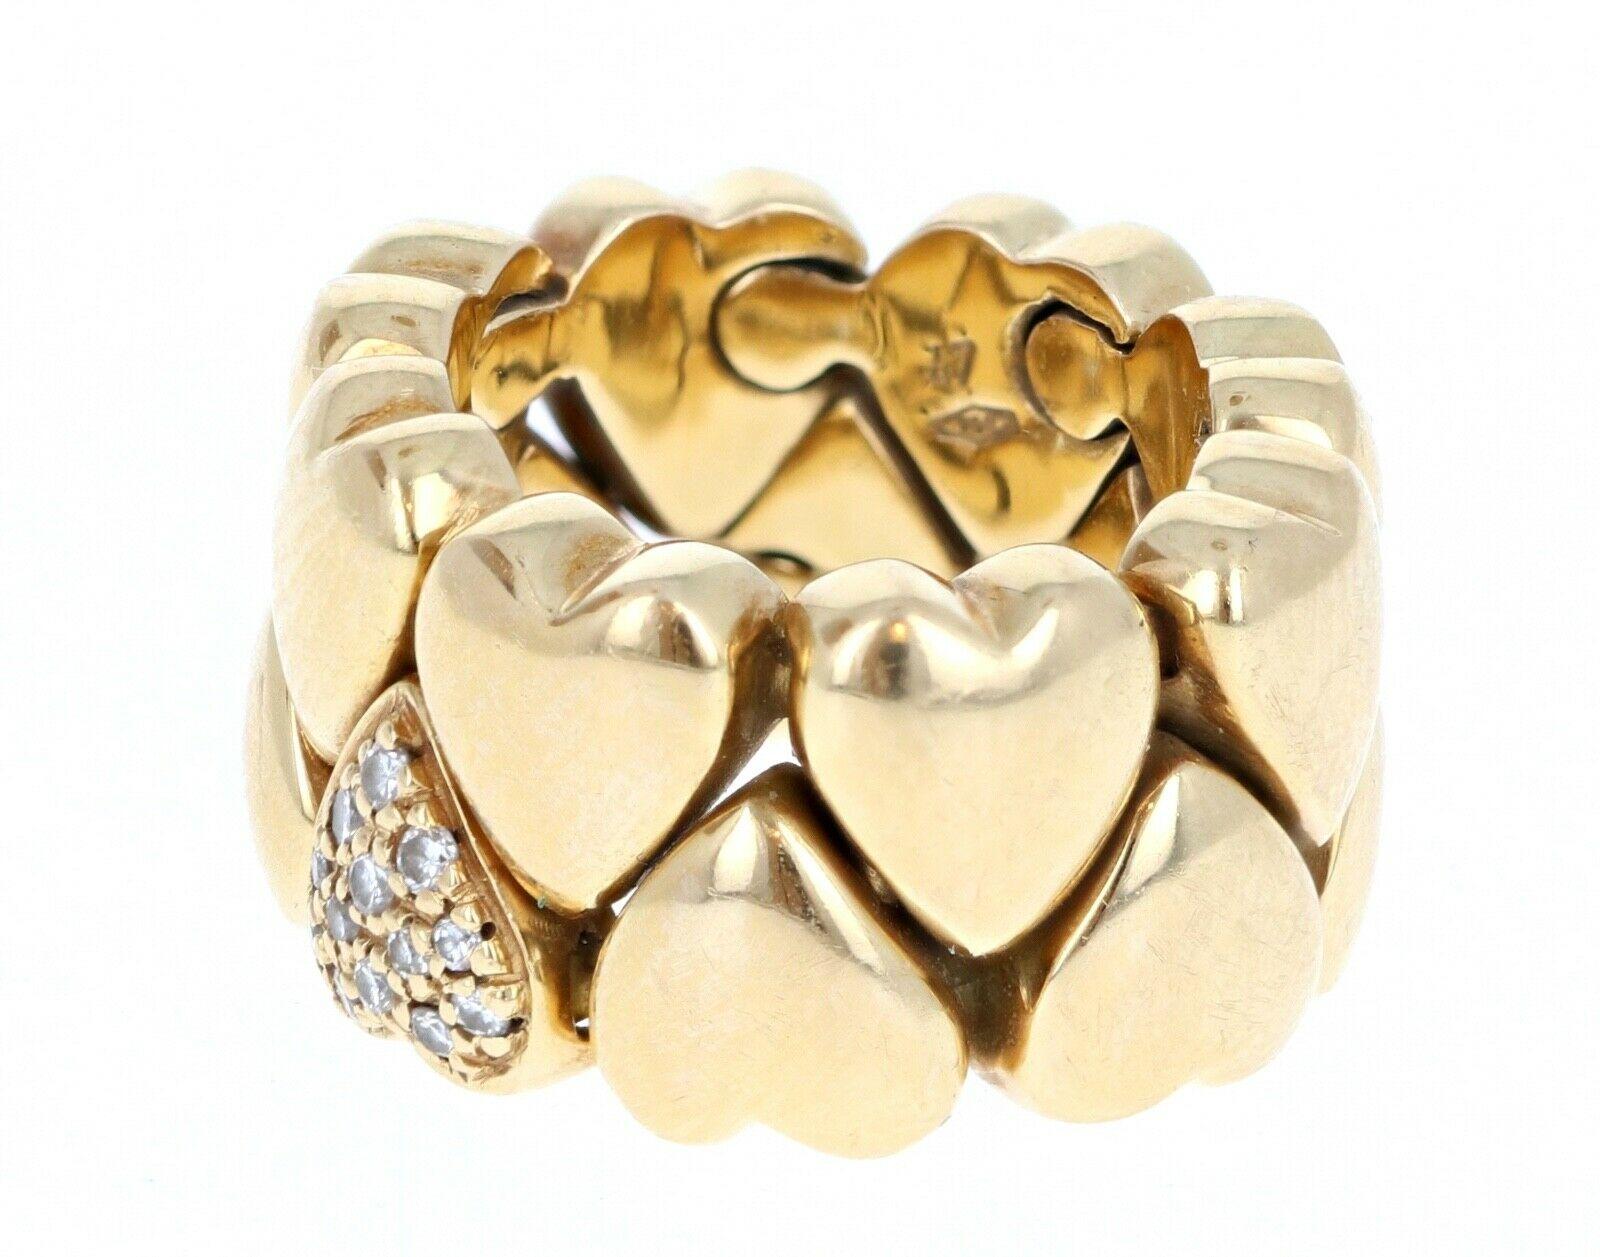 Vintage 1995 Cartier 18K Yellow Gold Puffy Heart Diamond Ring Size 47

For sale is a Cartier 18k yellow gold puffy heart ring. The ring is crafted in 18k yellow gold and features alternating puffy hearts. There Is one micro pave diamond heart on the